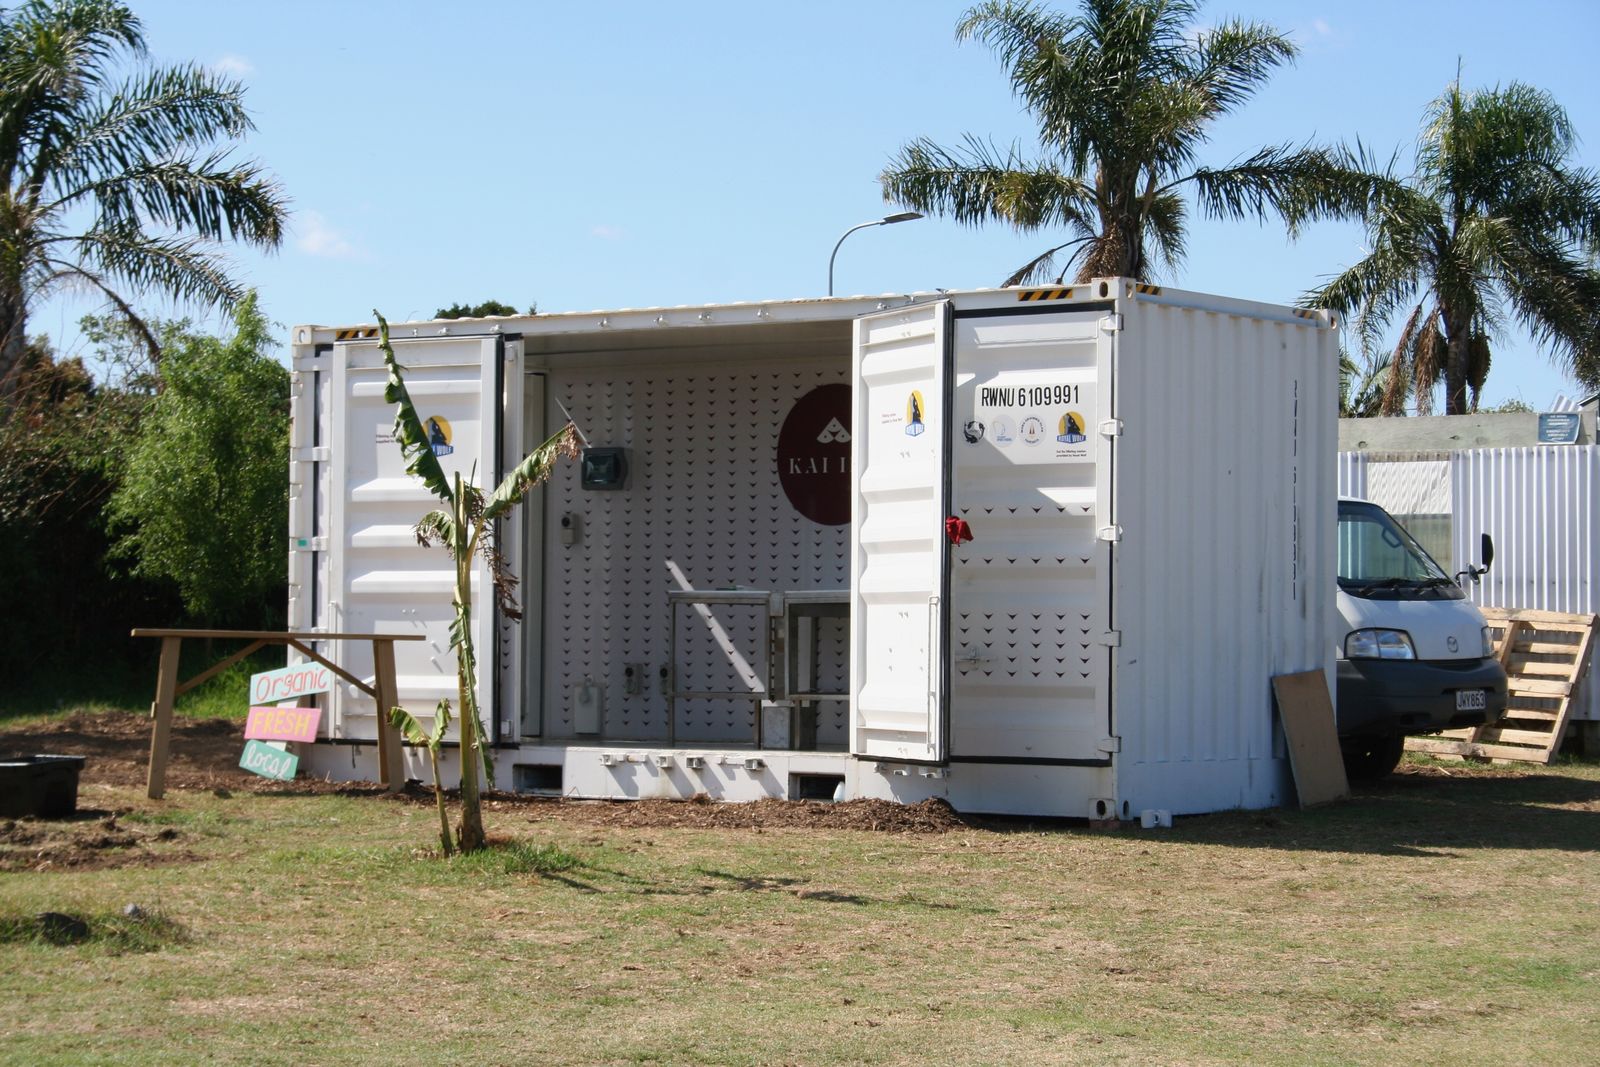 Shipping container serves up delicious kai moana for the community